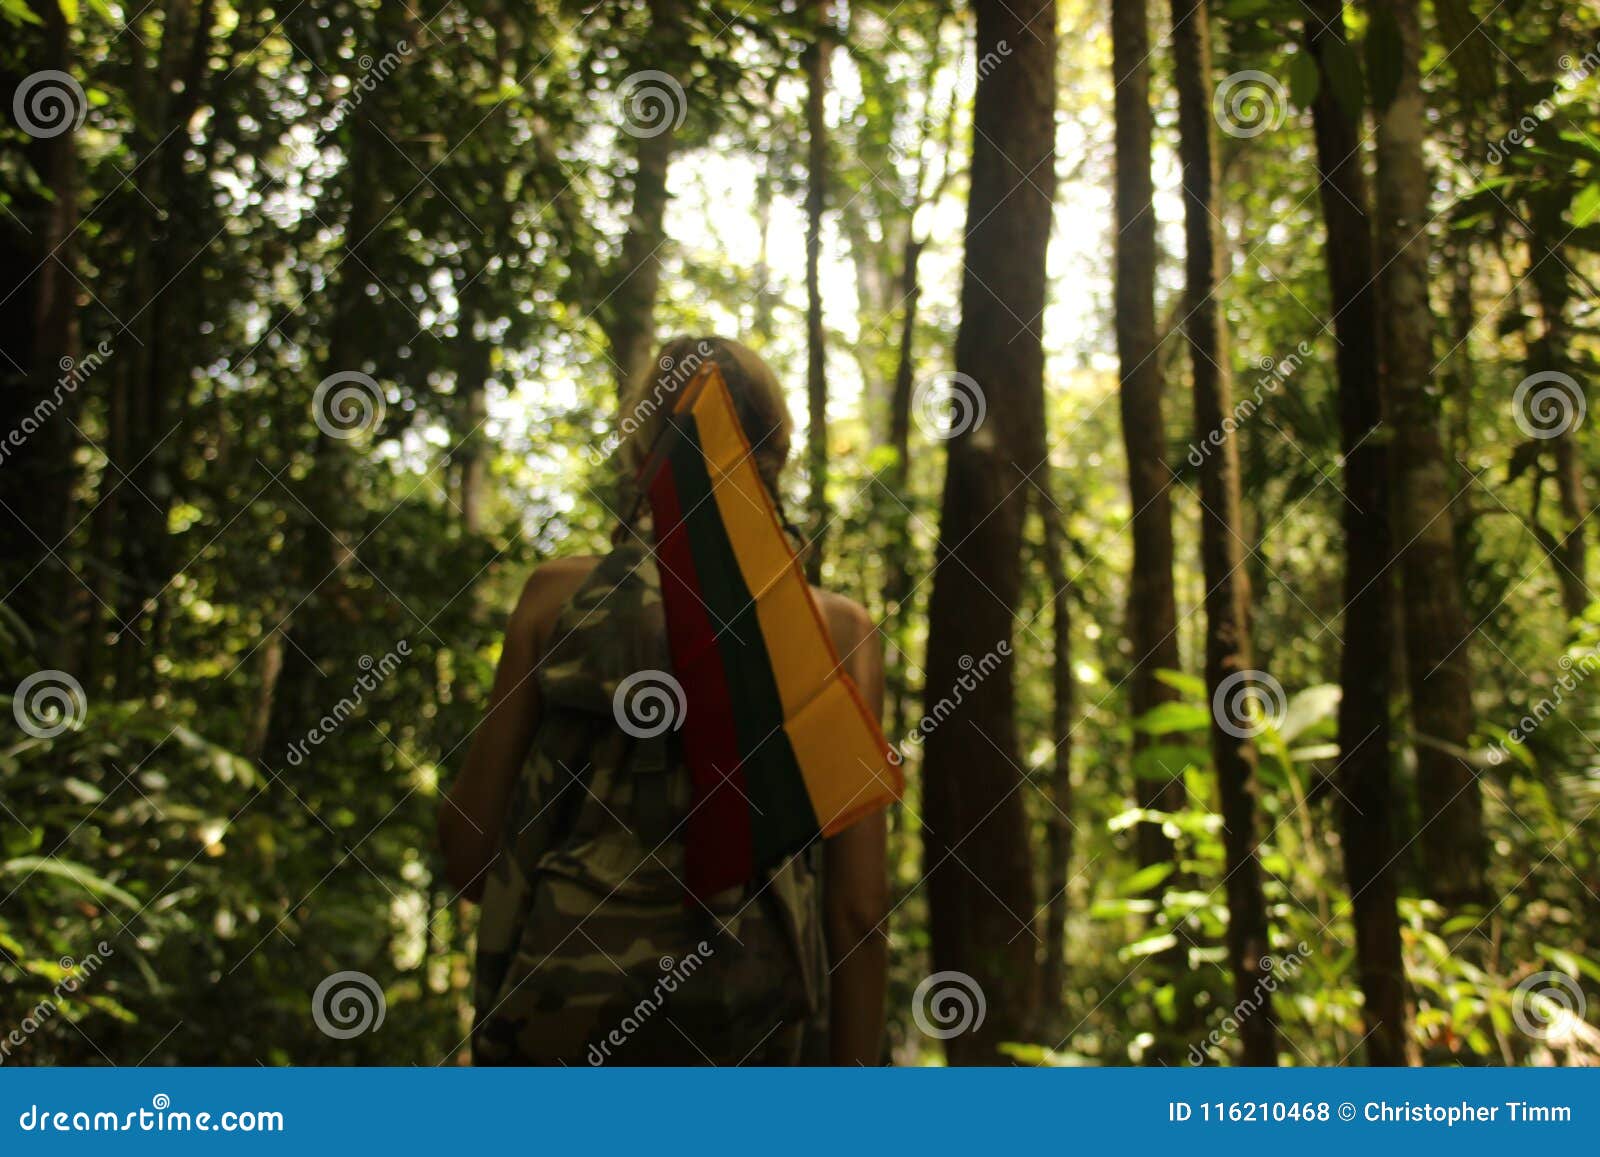 woman is walking with a lithuanian flag through a forest